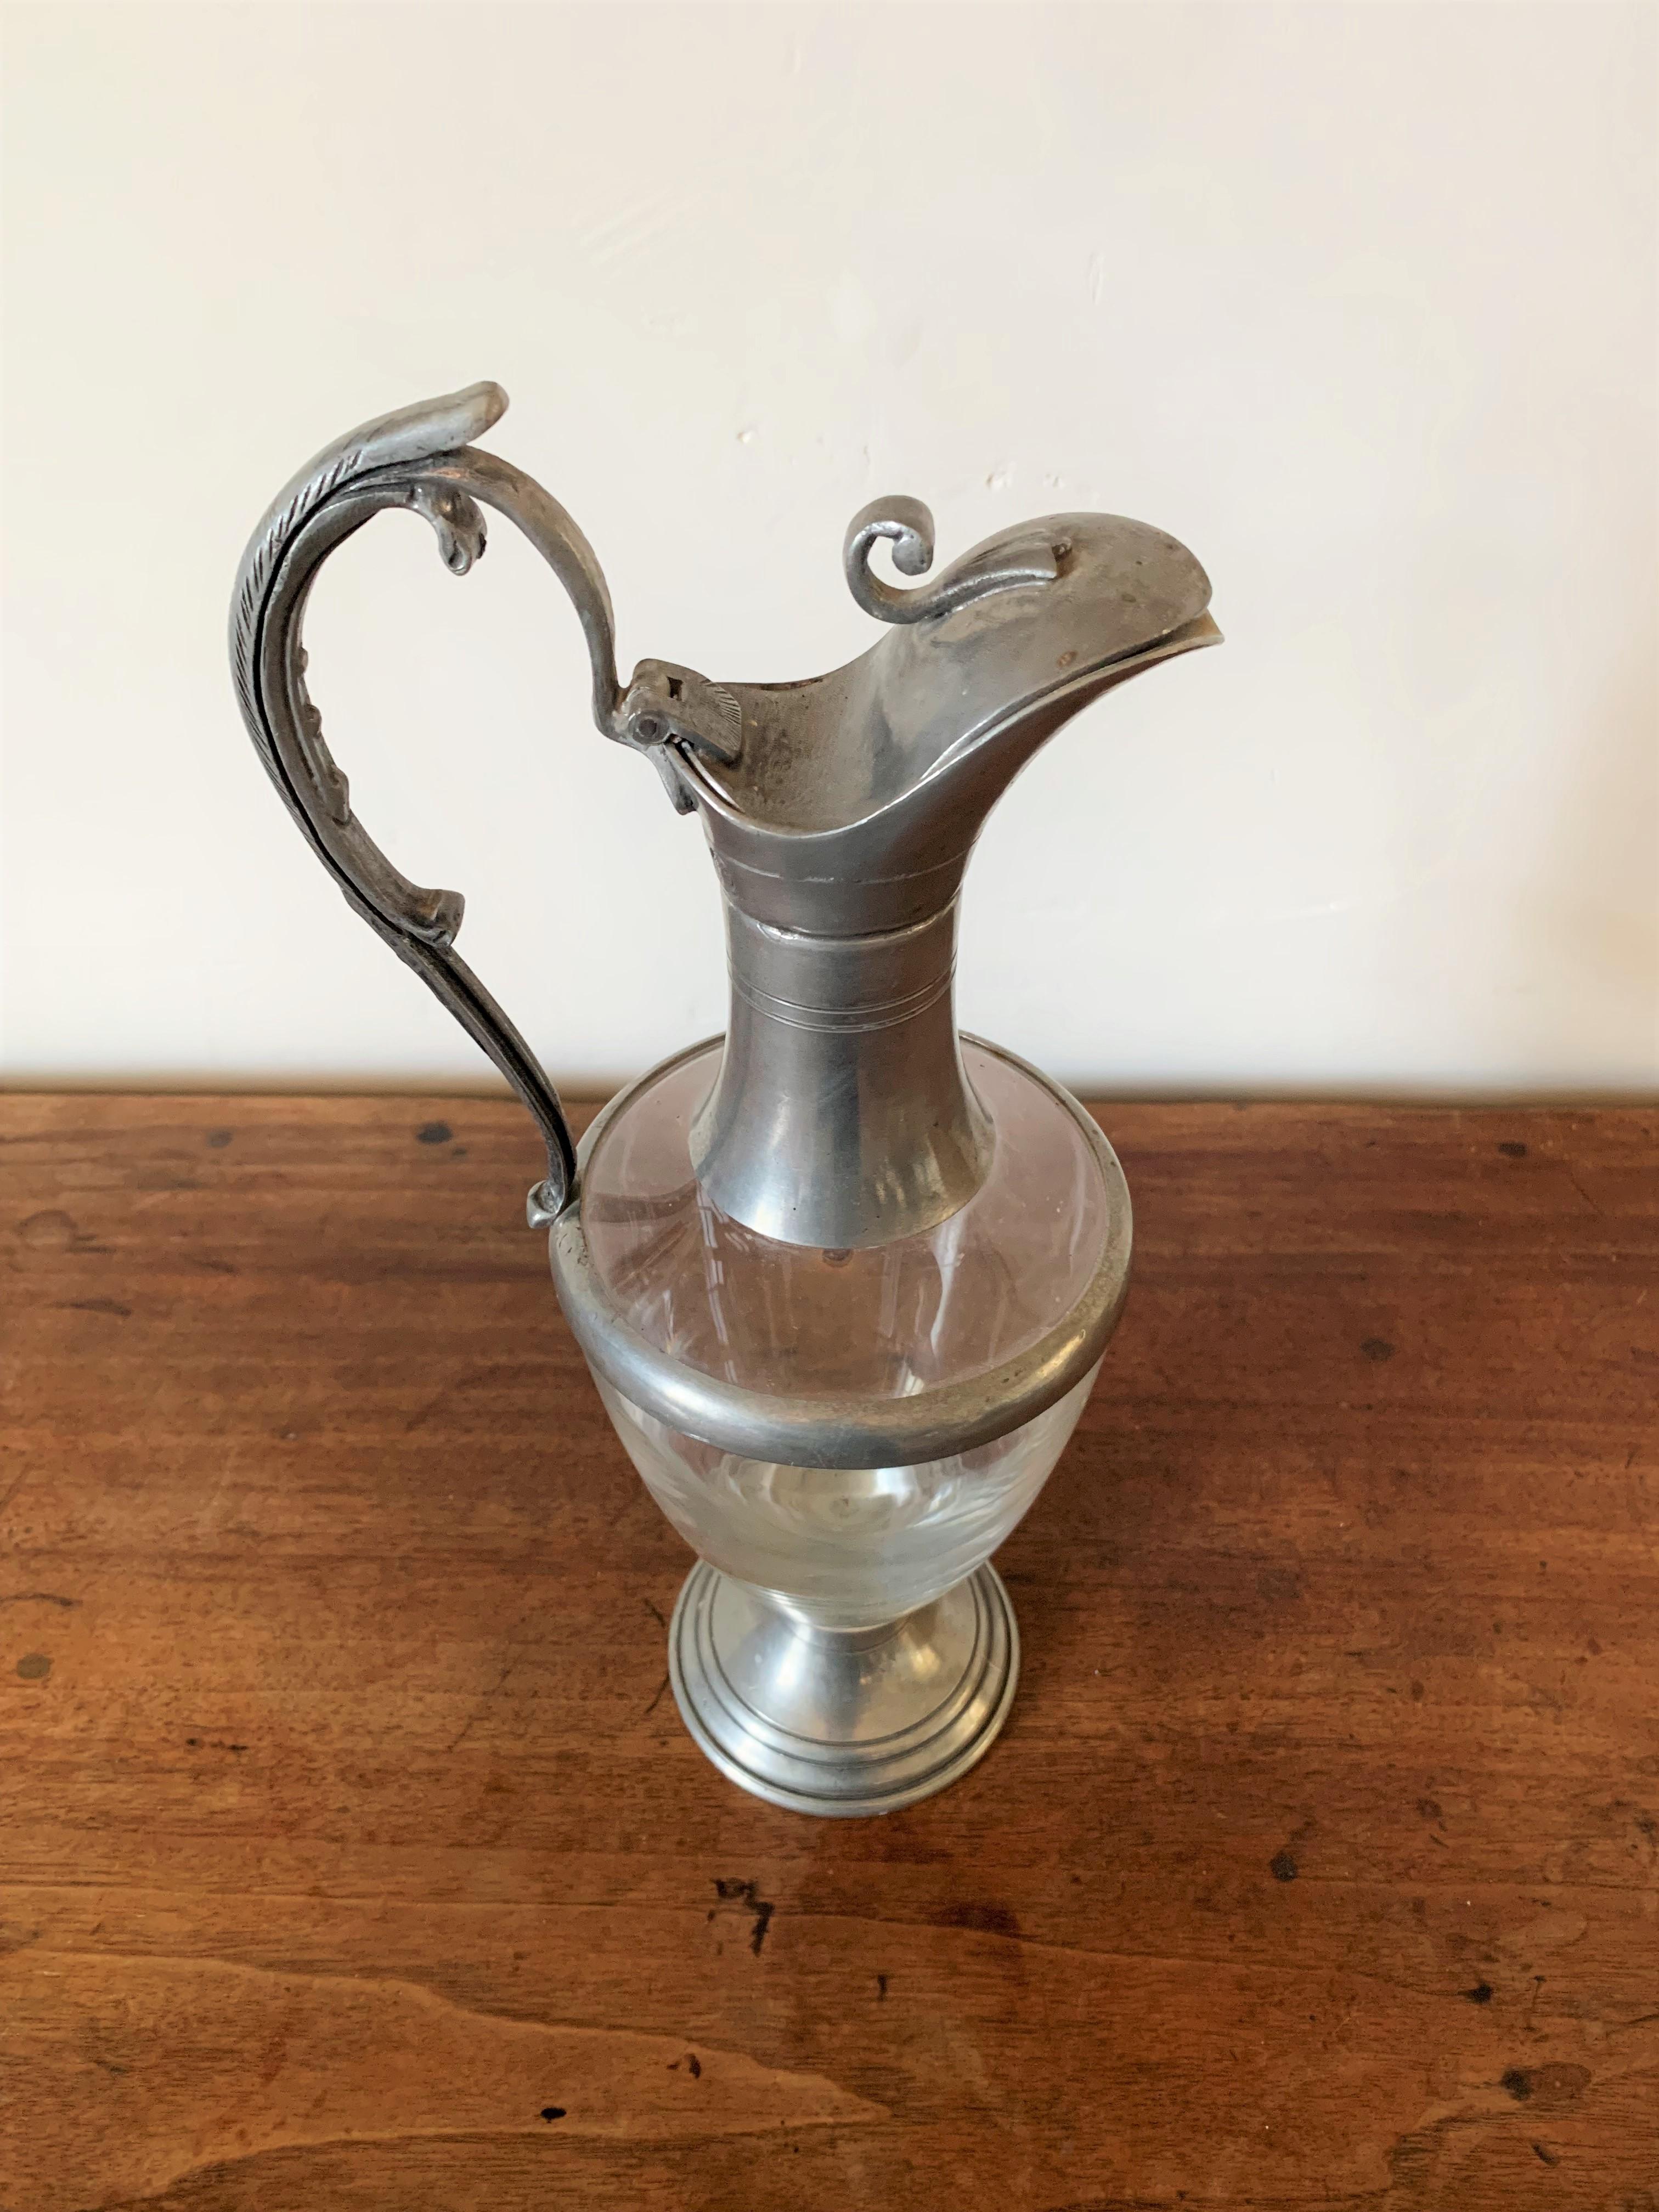 Very nice ewer, carafe from the early 20th century. The body is made of smooth glass while the foot, handle and spout are made of pewter, a very rare element and one of the oldest known at least since antiquity. The handle is graceful with a vegetal